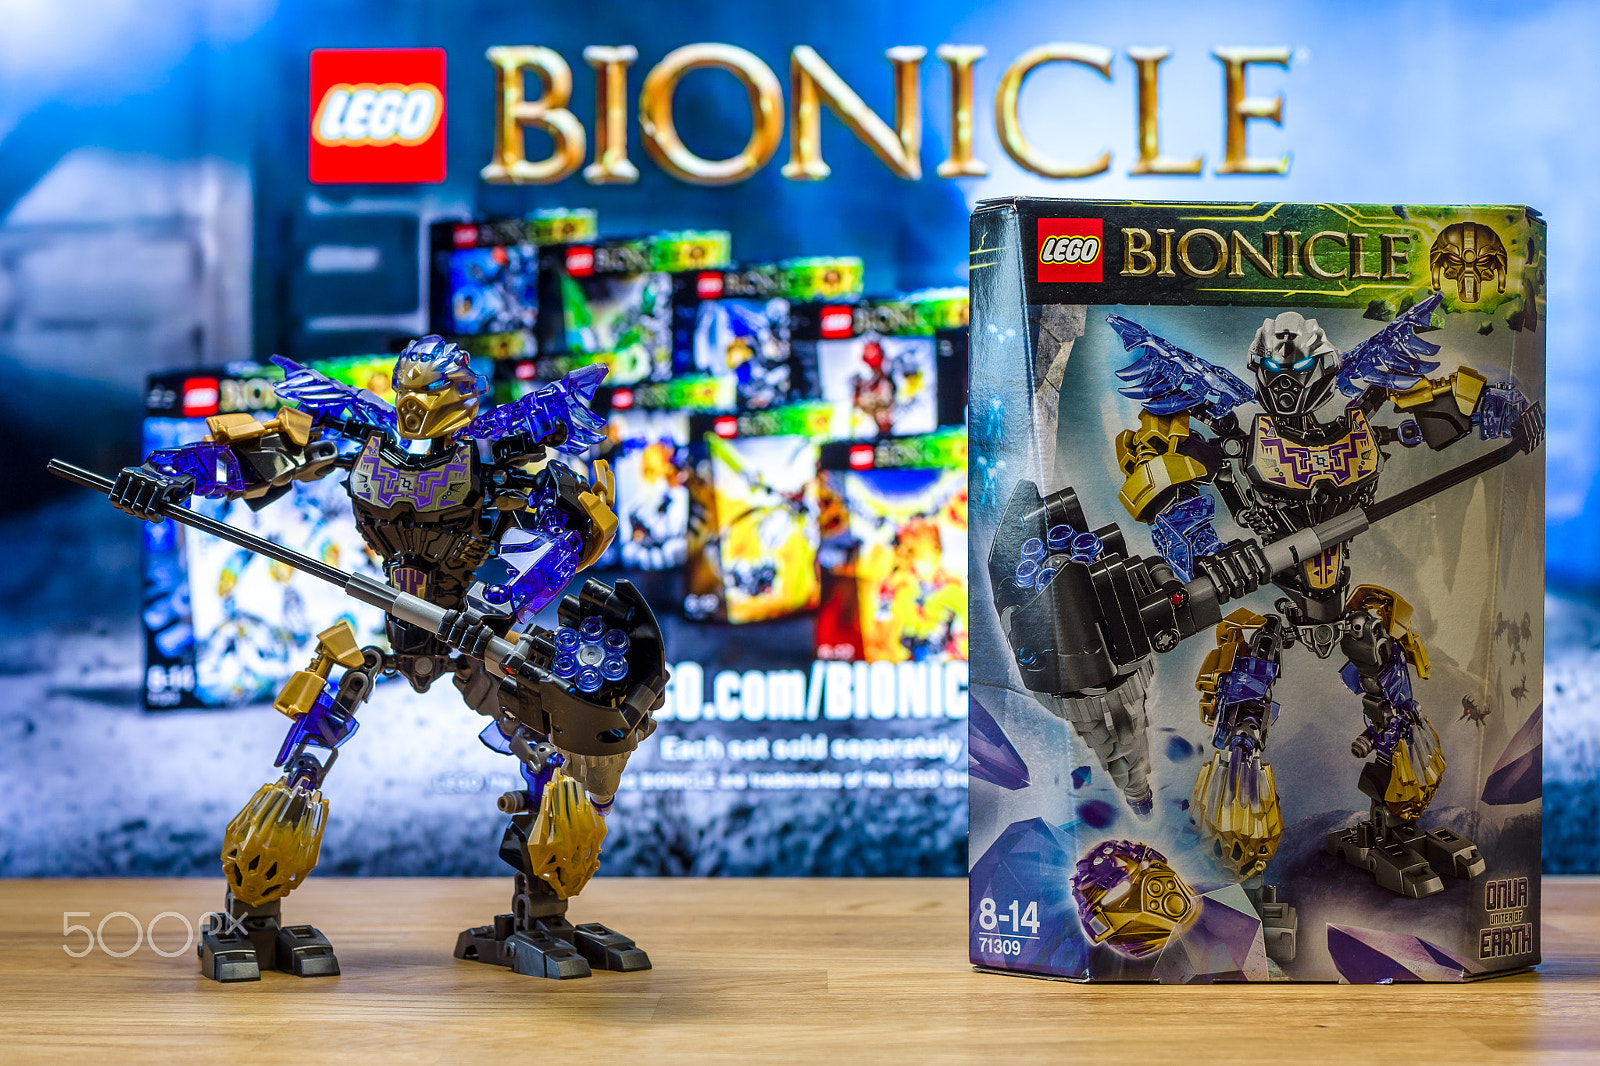 Sony SLT-A77 sample photo. A character (toy) universe of lego bionicle - onua, uniter of earth. photography